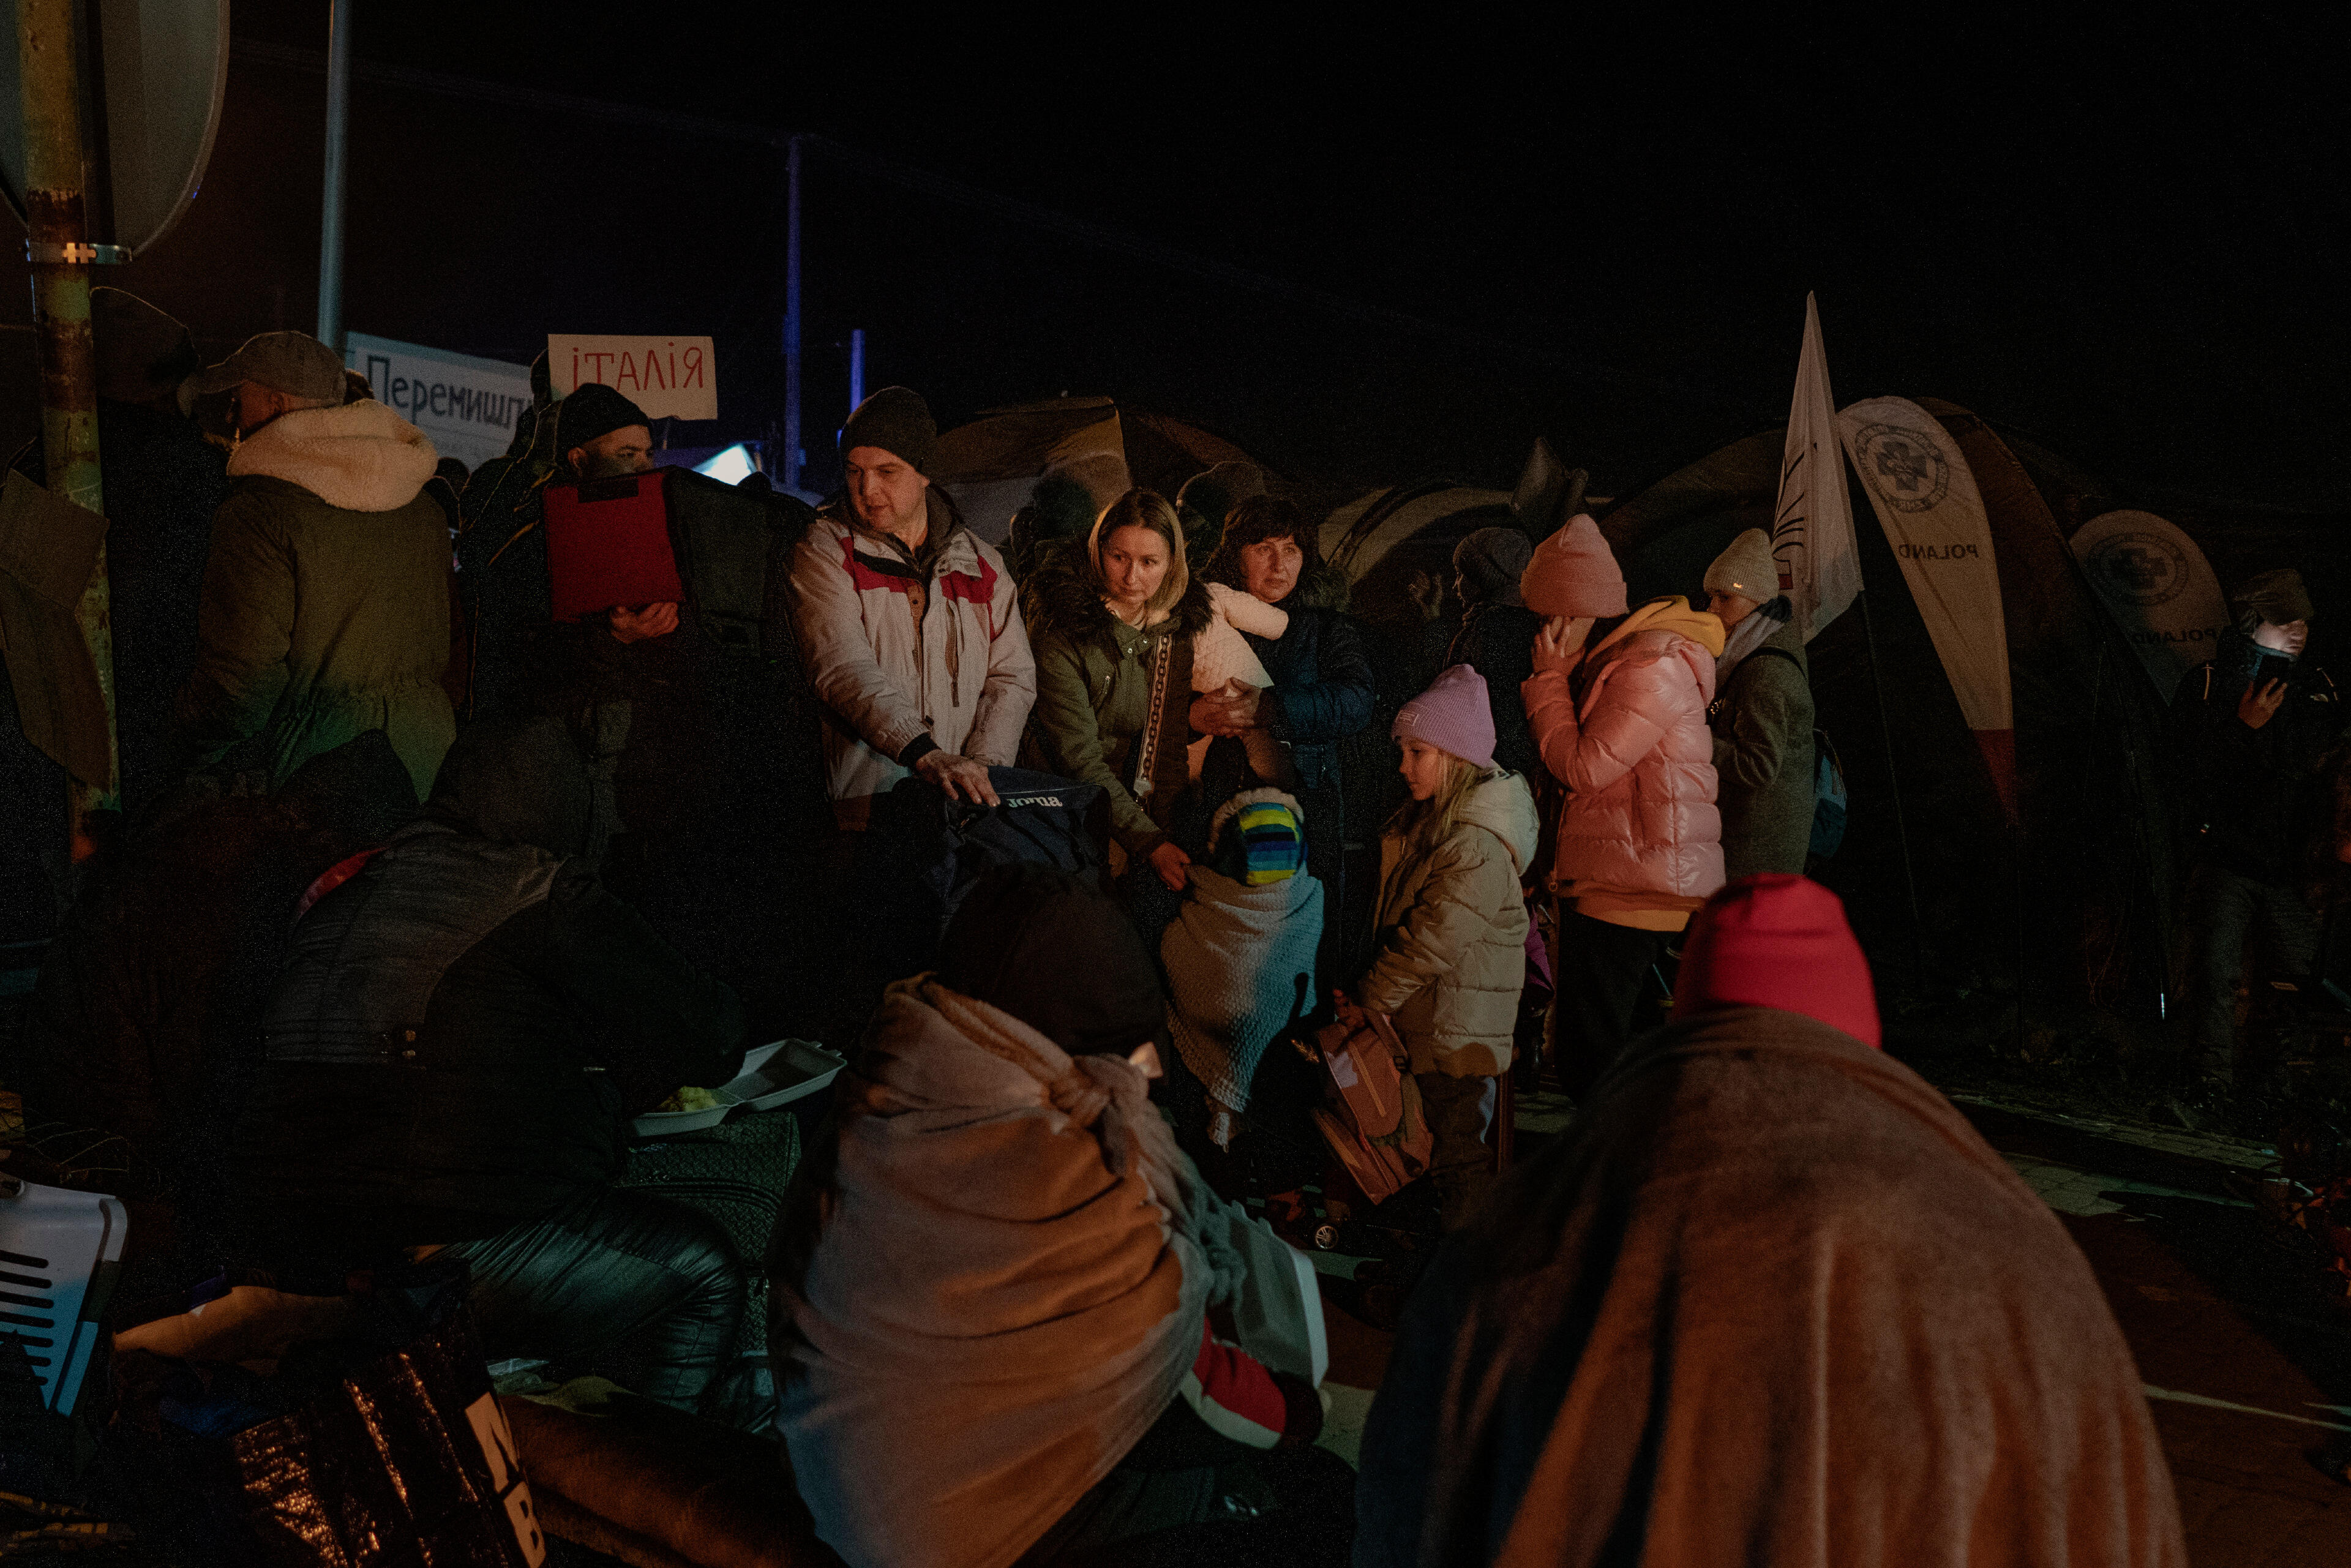 A small group of families with children who fled the war Ukraine, wearing winter coats, stand with their bags on a cold night at the Polish border at Medyka.